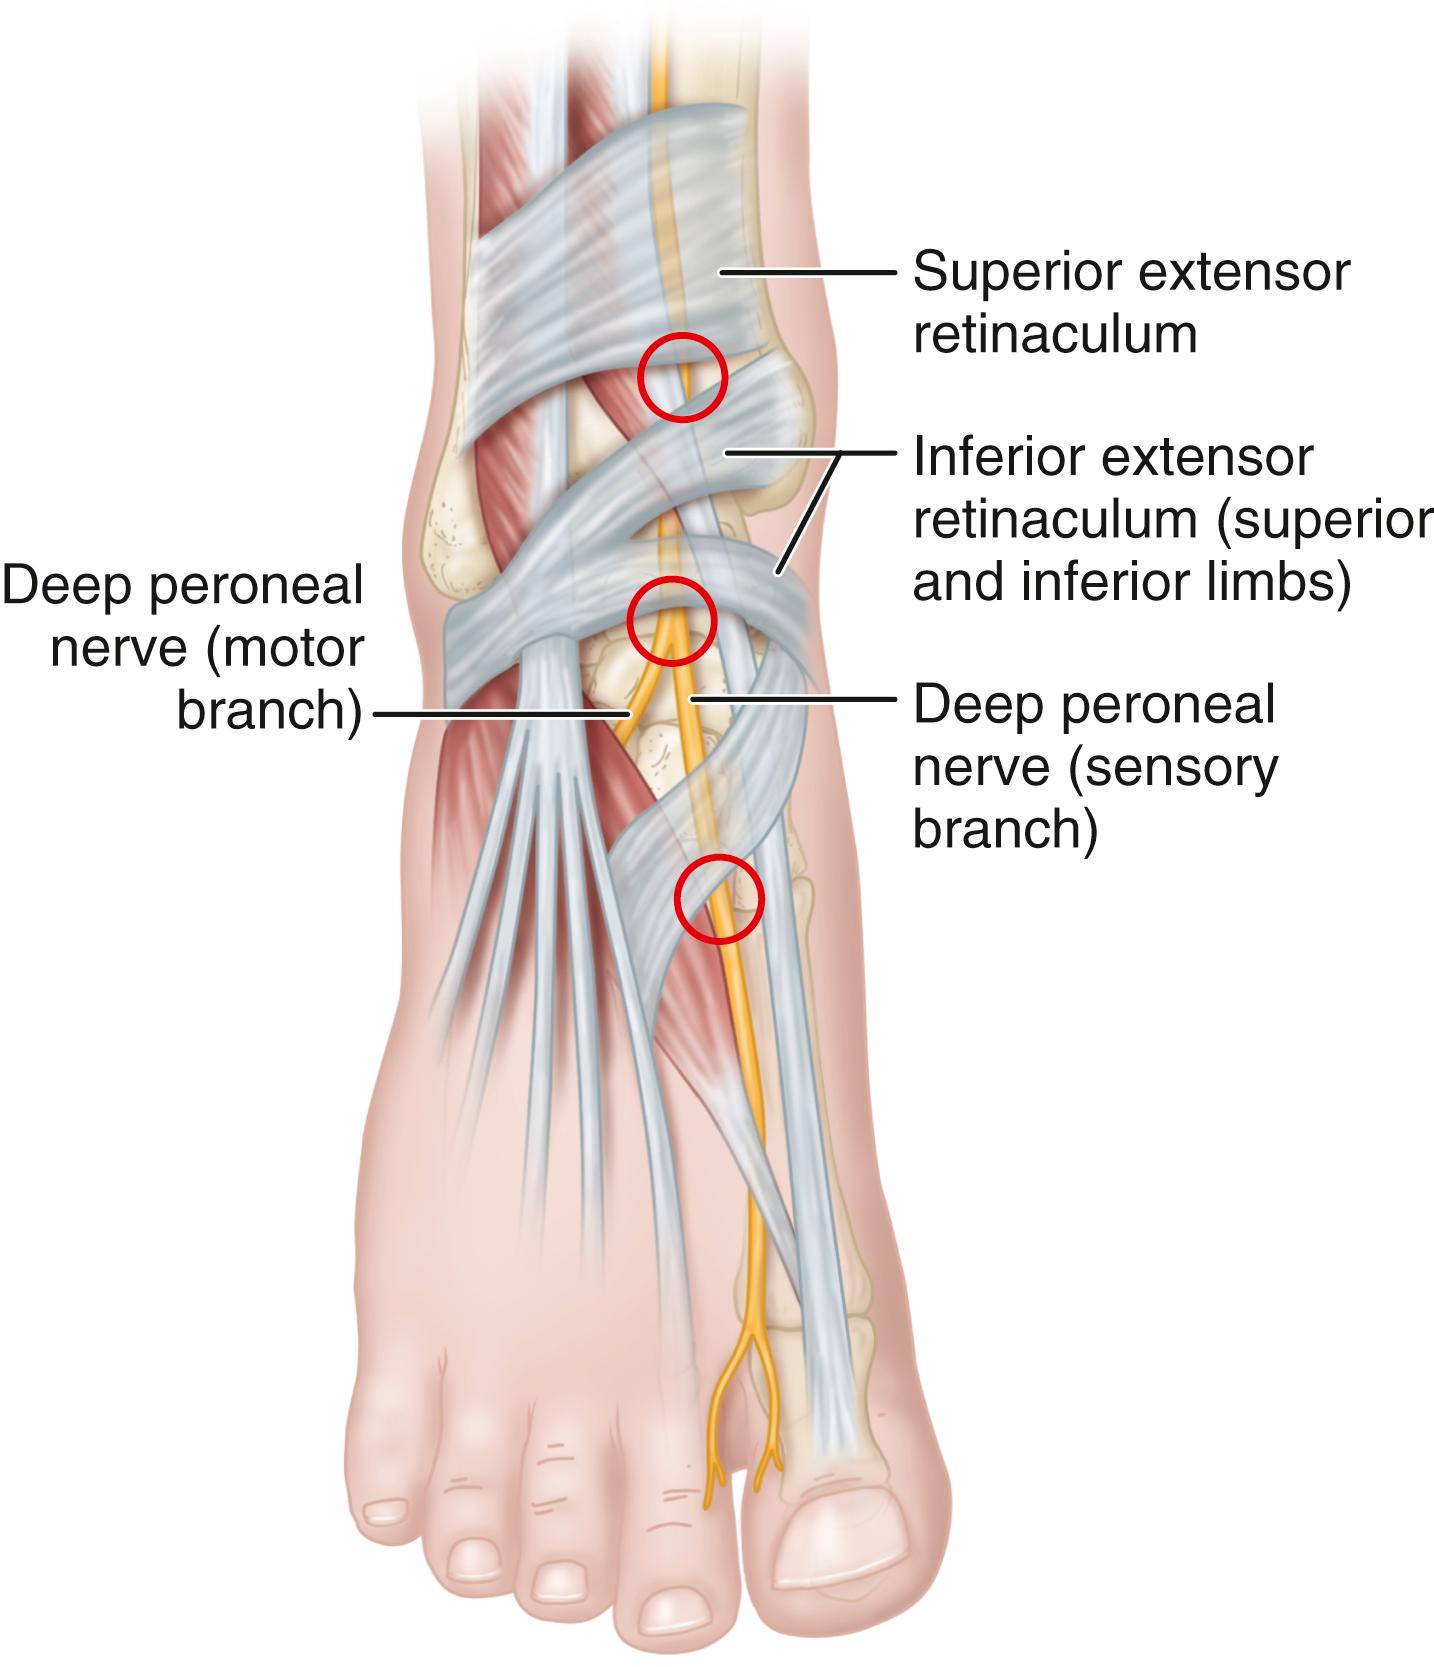 FIGURE 87.5, Deep peroneal nerve entrapment. Circles denote areas of impingement.